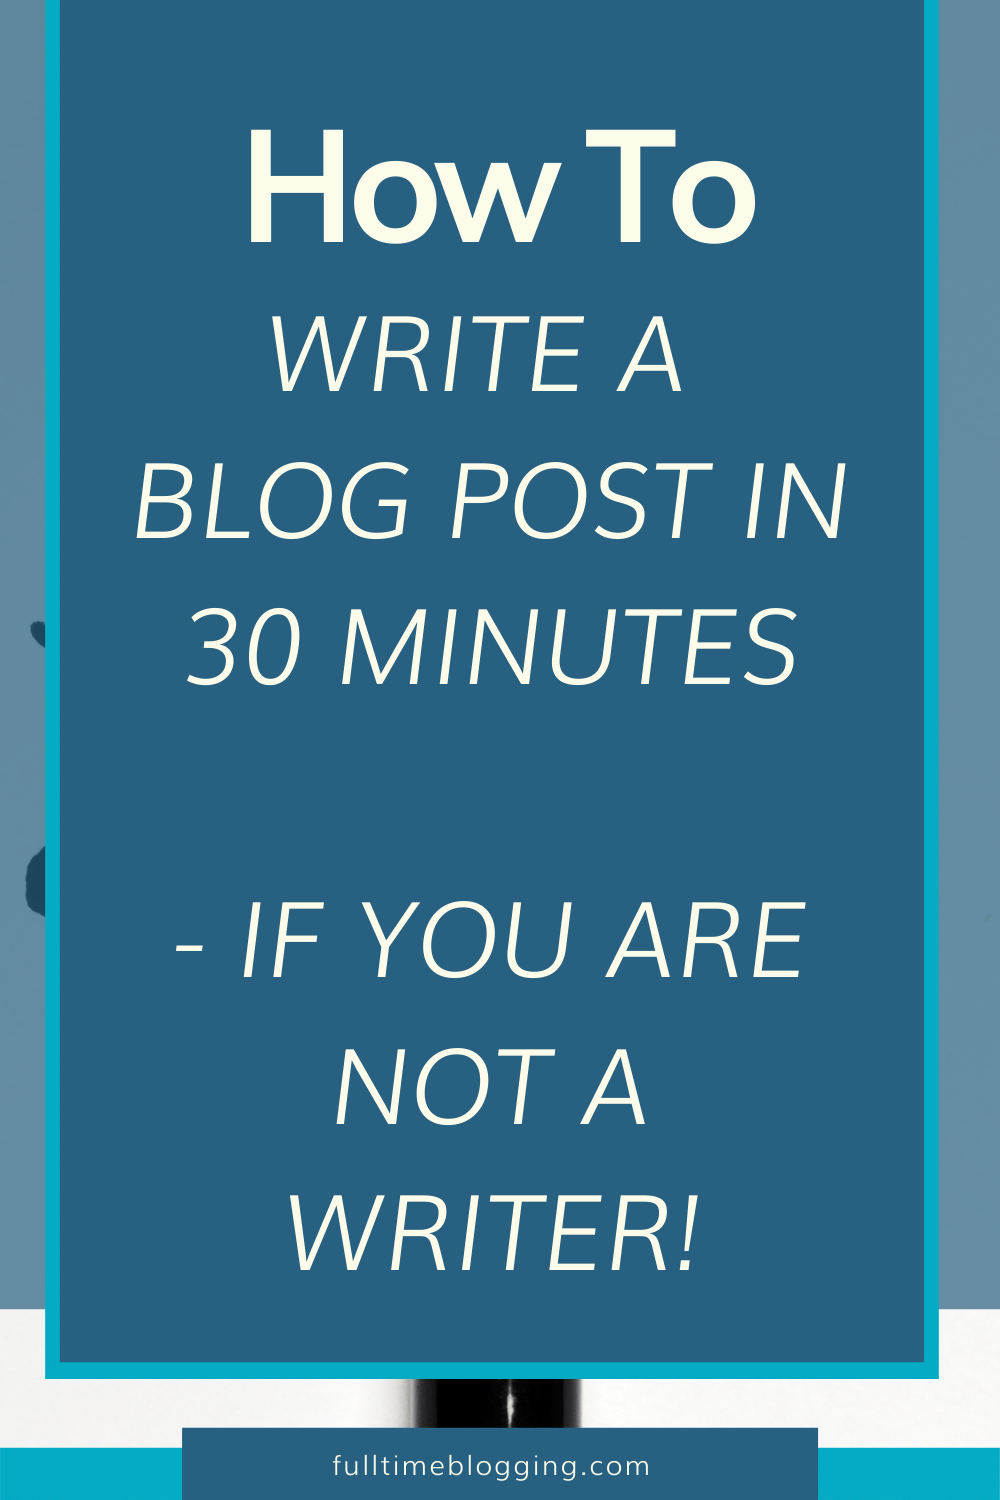 How To Write A Blog Post In 30 Minutes